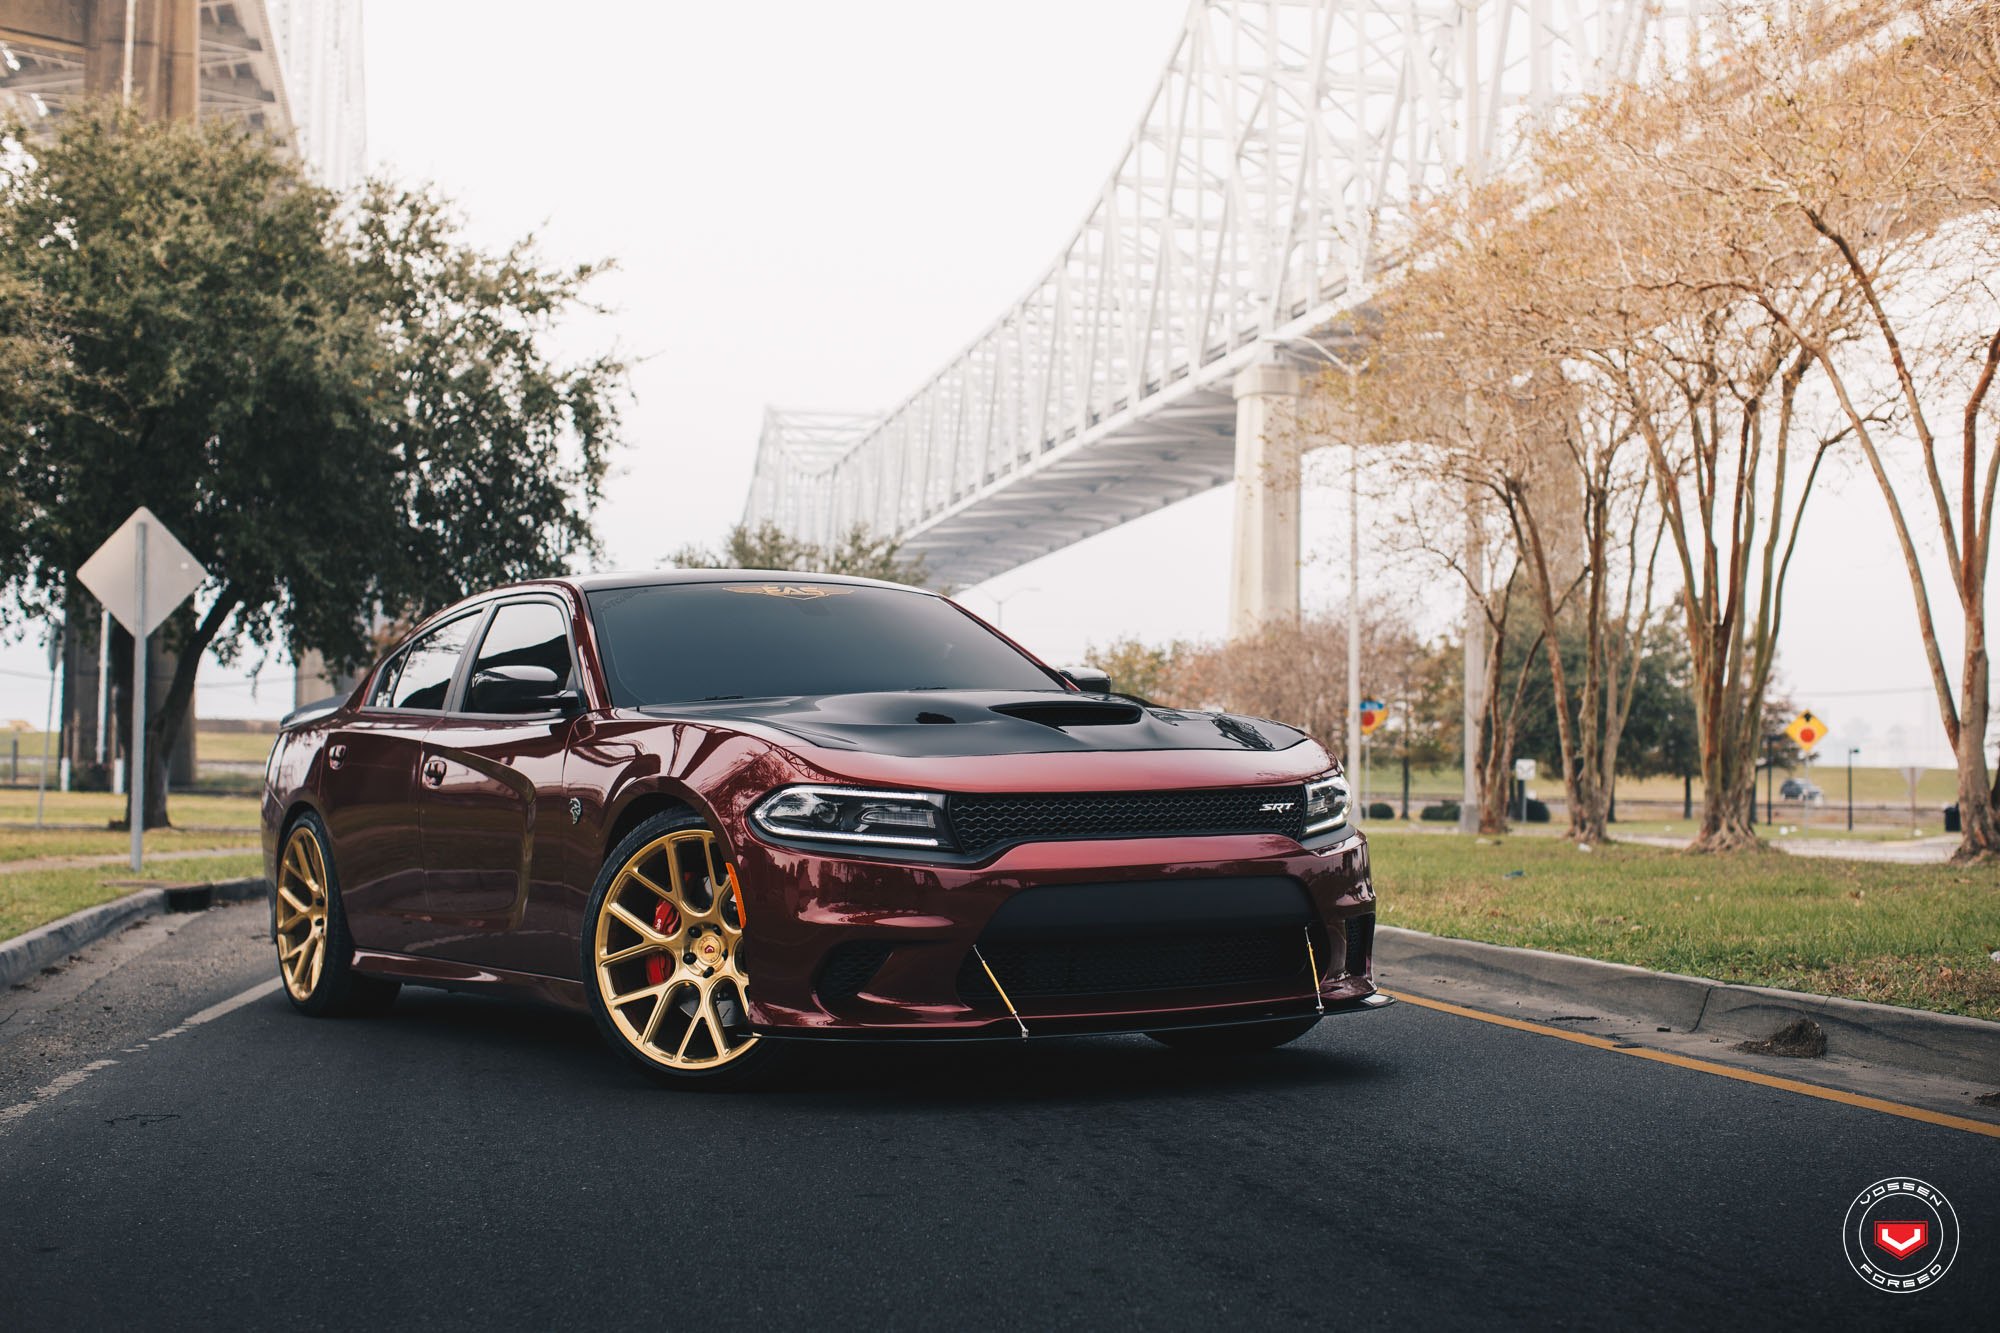 Custom Vented Hood on Red Dodge Charger SRT - Photo by Vossen